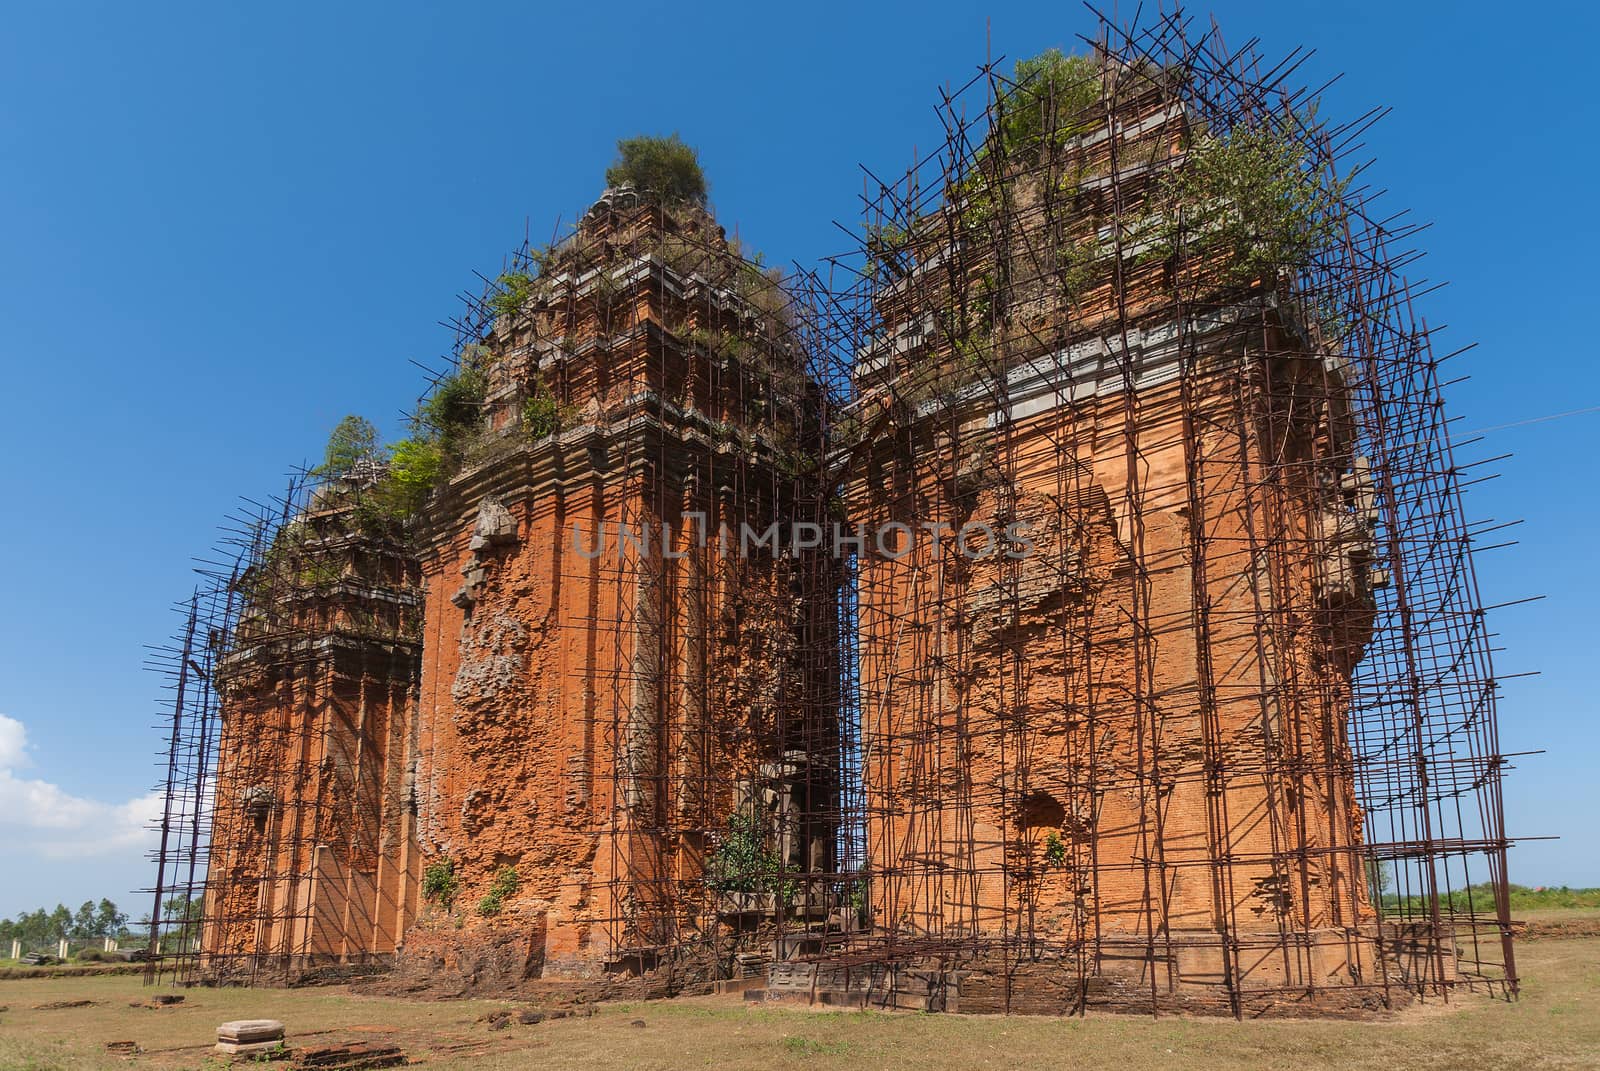 Vietnam, The three towers of Duong Long Cham towers.